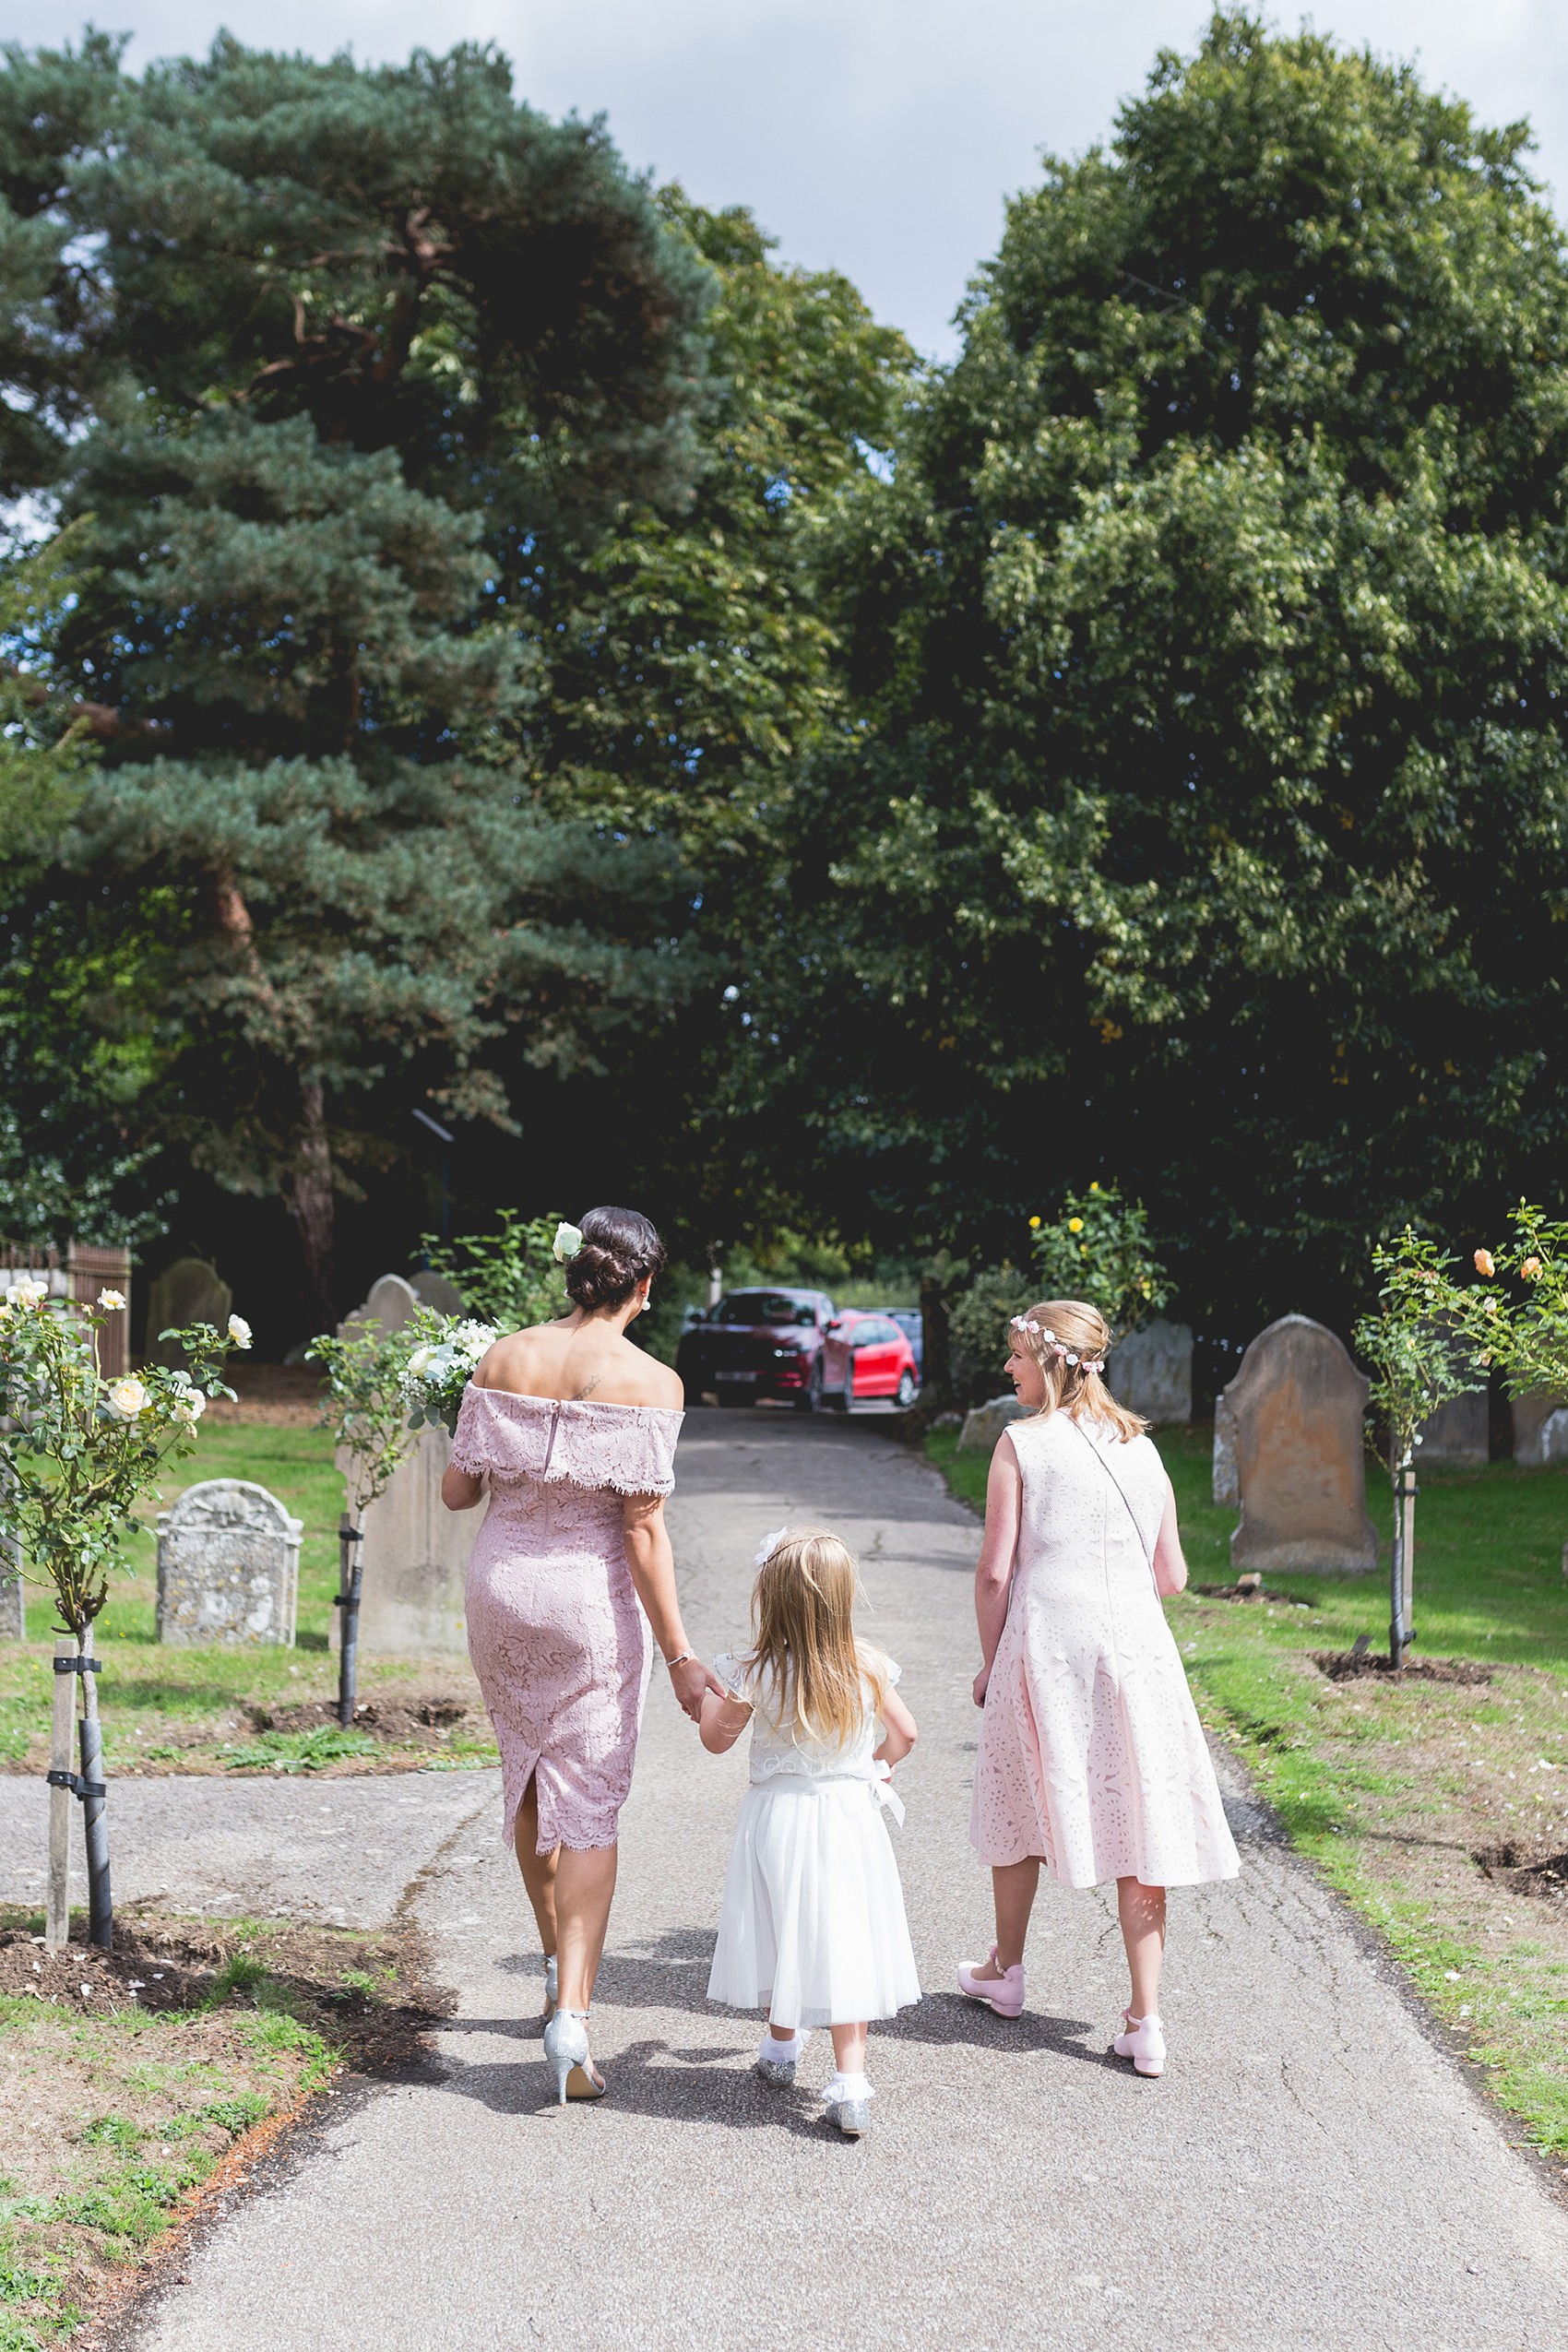 Temperley London bride - A Bride in Temperley London For A Classic Country House Summer Wedding